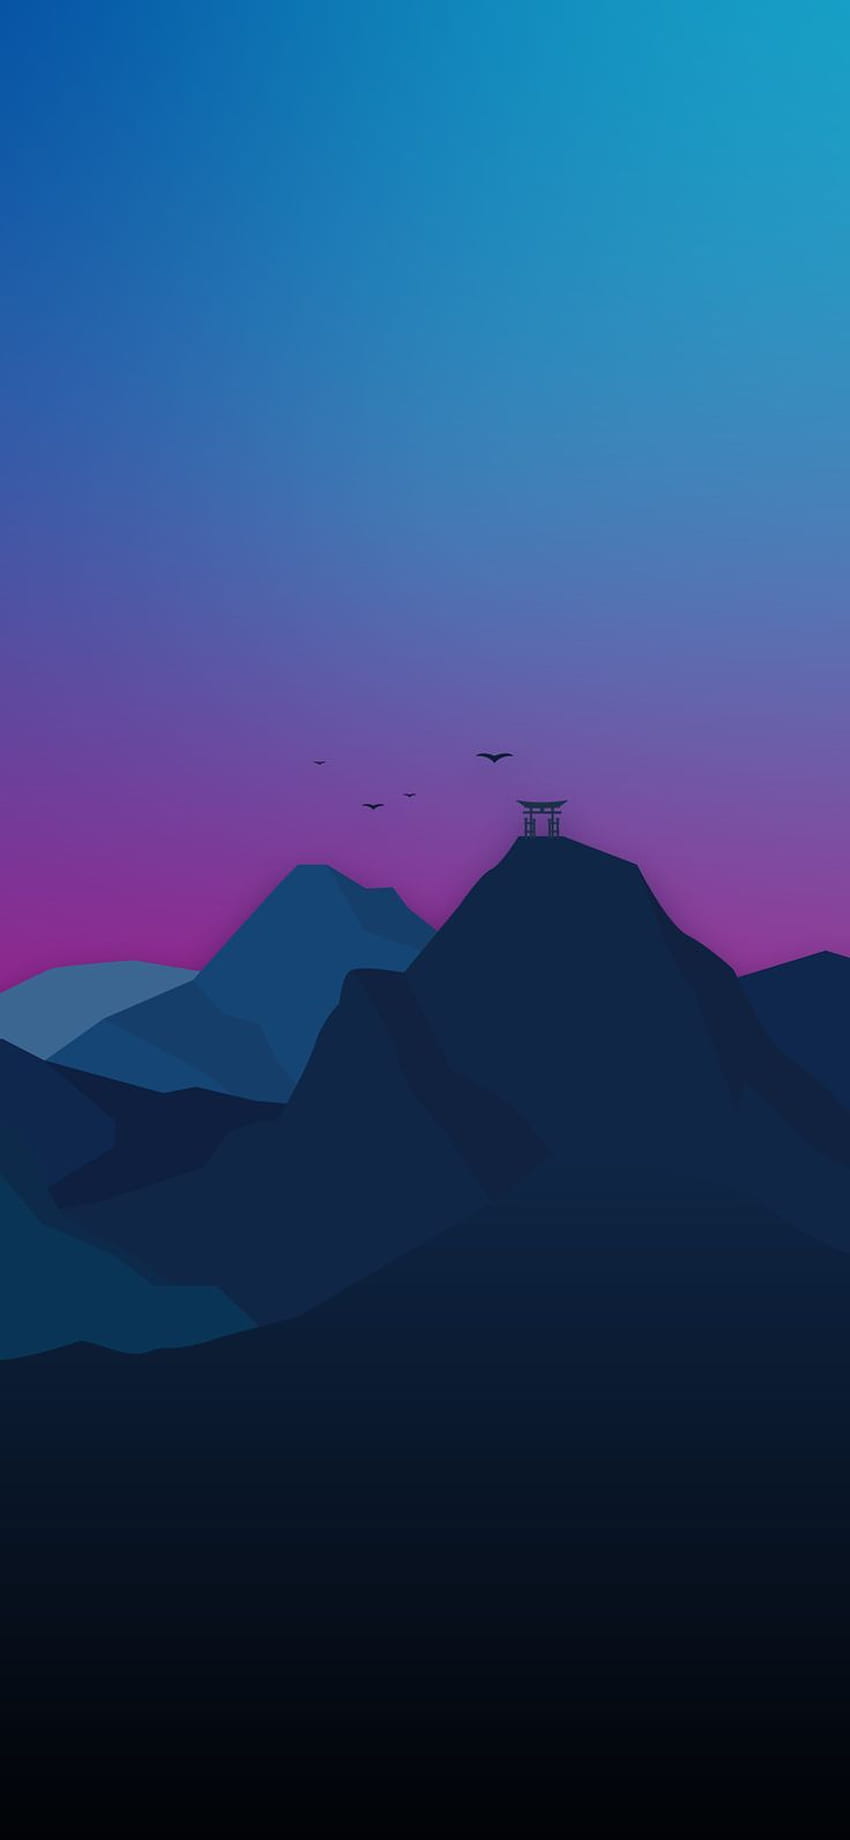 Tải xuống APK Minimalist Wallpapers cho Android